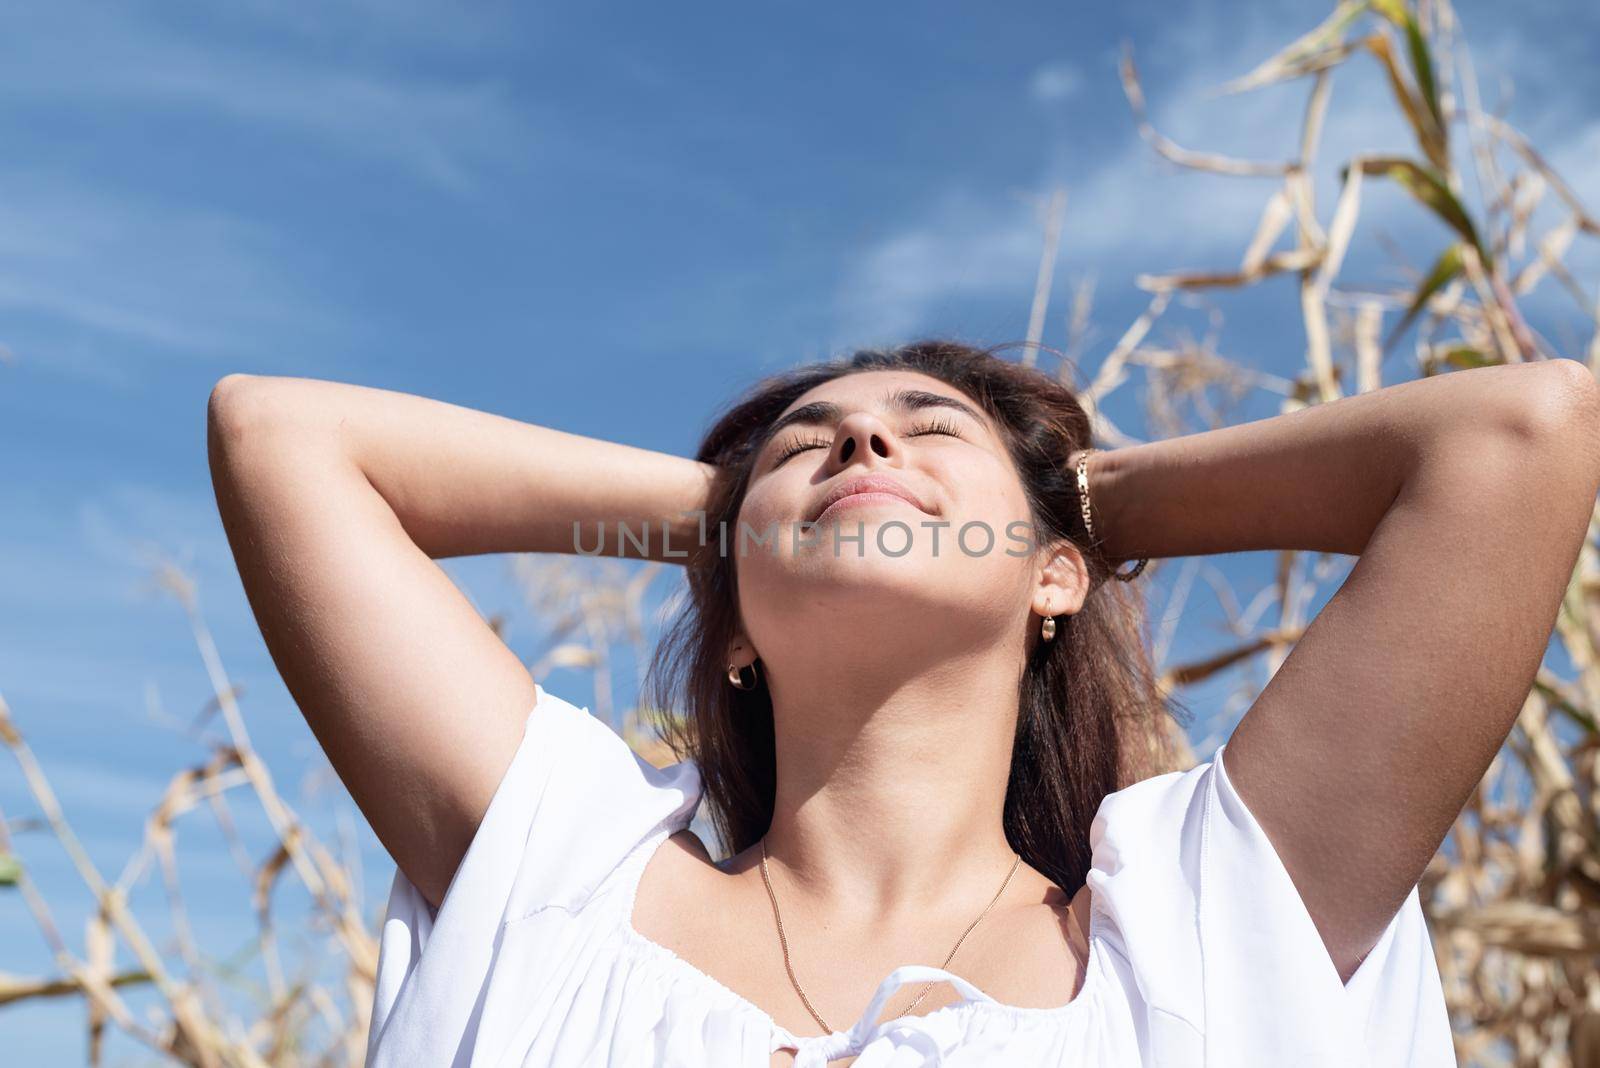 Cheerful caucasian woman in white dress in the corn crop, sky background by Desperada